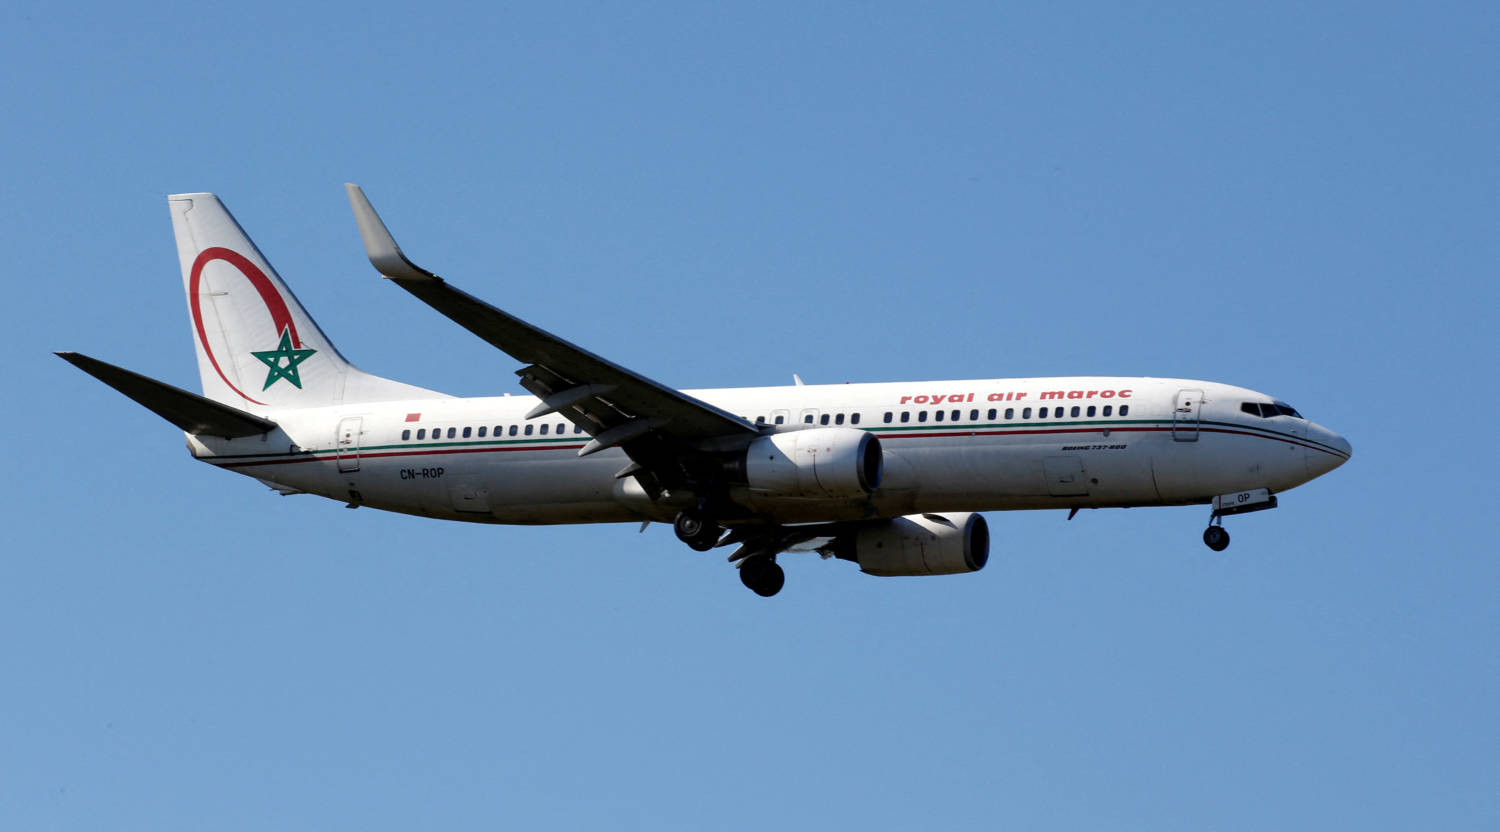 File Photo: The Cn Rop Royal Air Maroc Boeing 737 Makes Its Final Approach For Landing At Toulouse Blagnac Airport